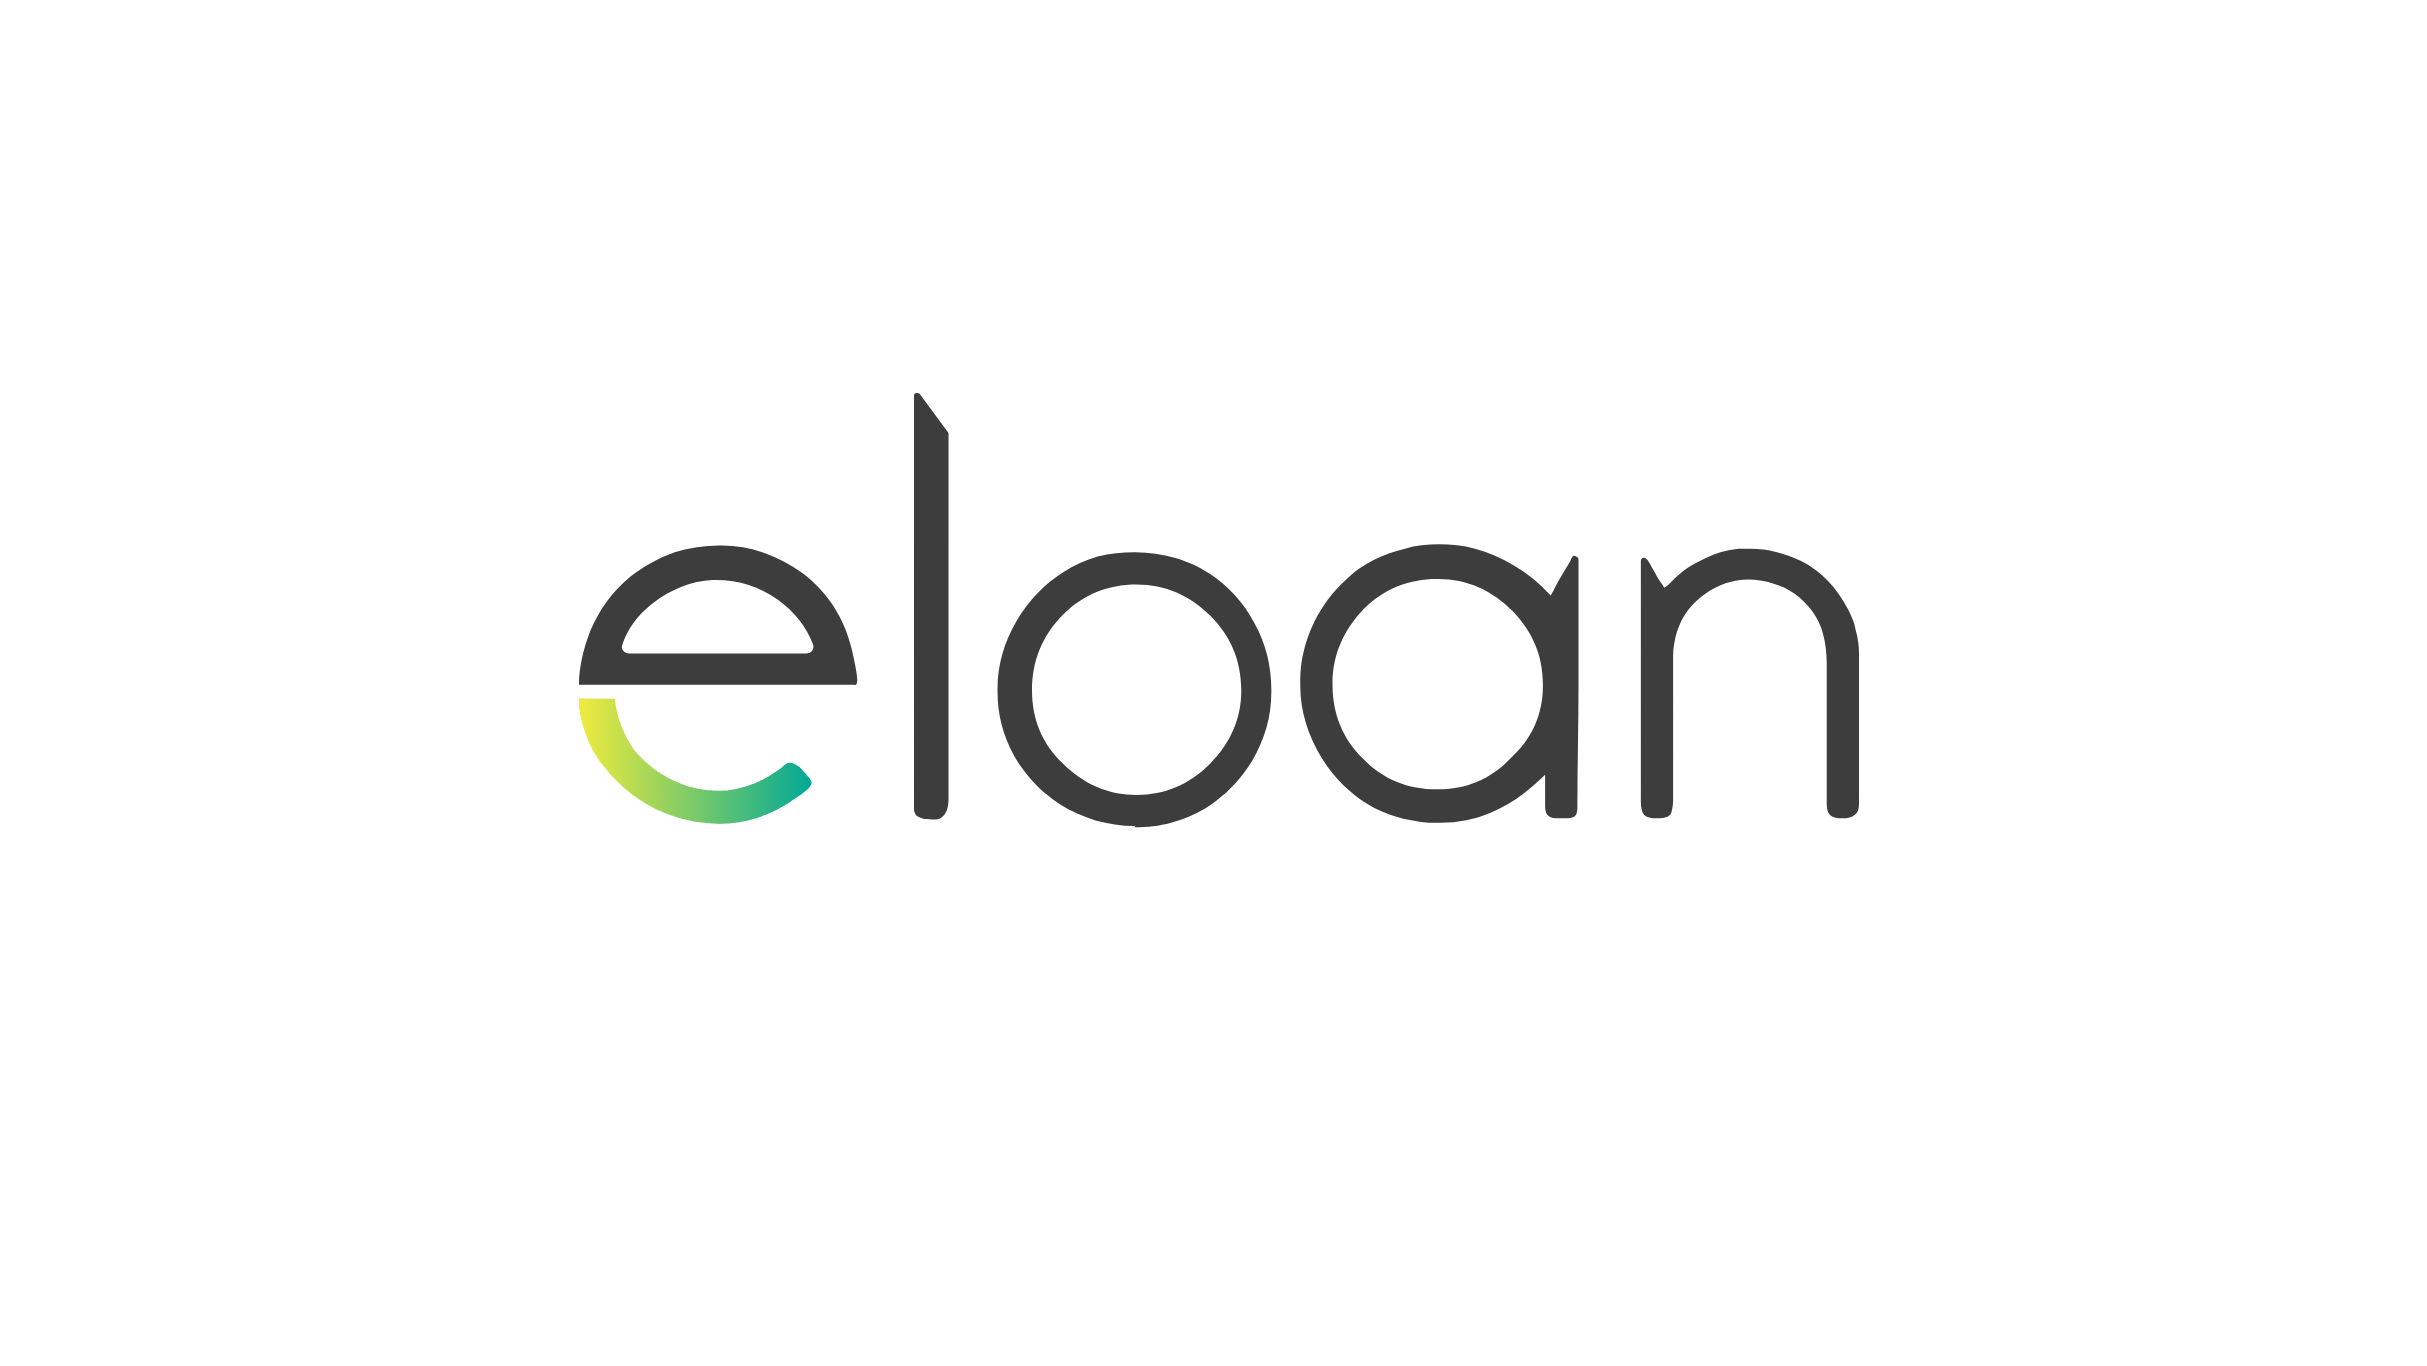 See what the benefits of the Eloan are. Source: Eloan.